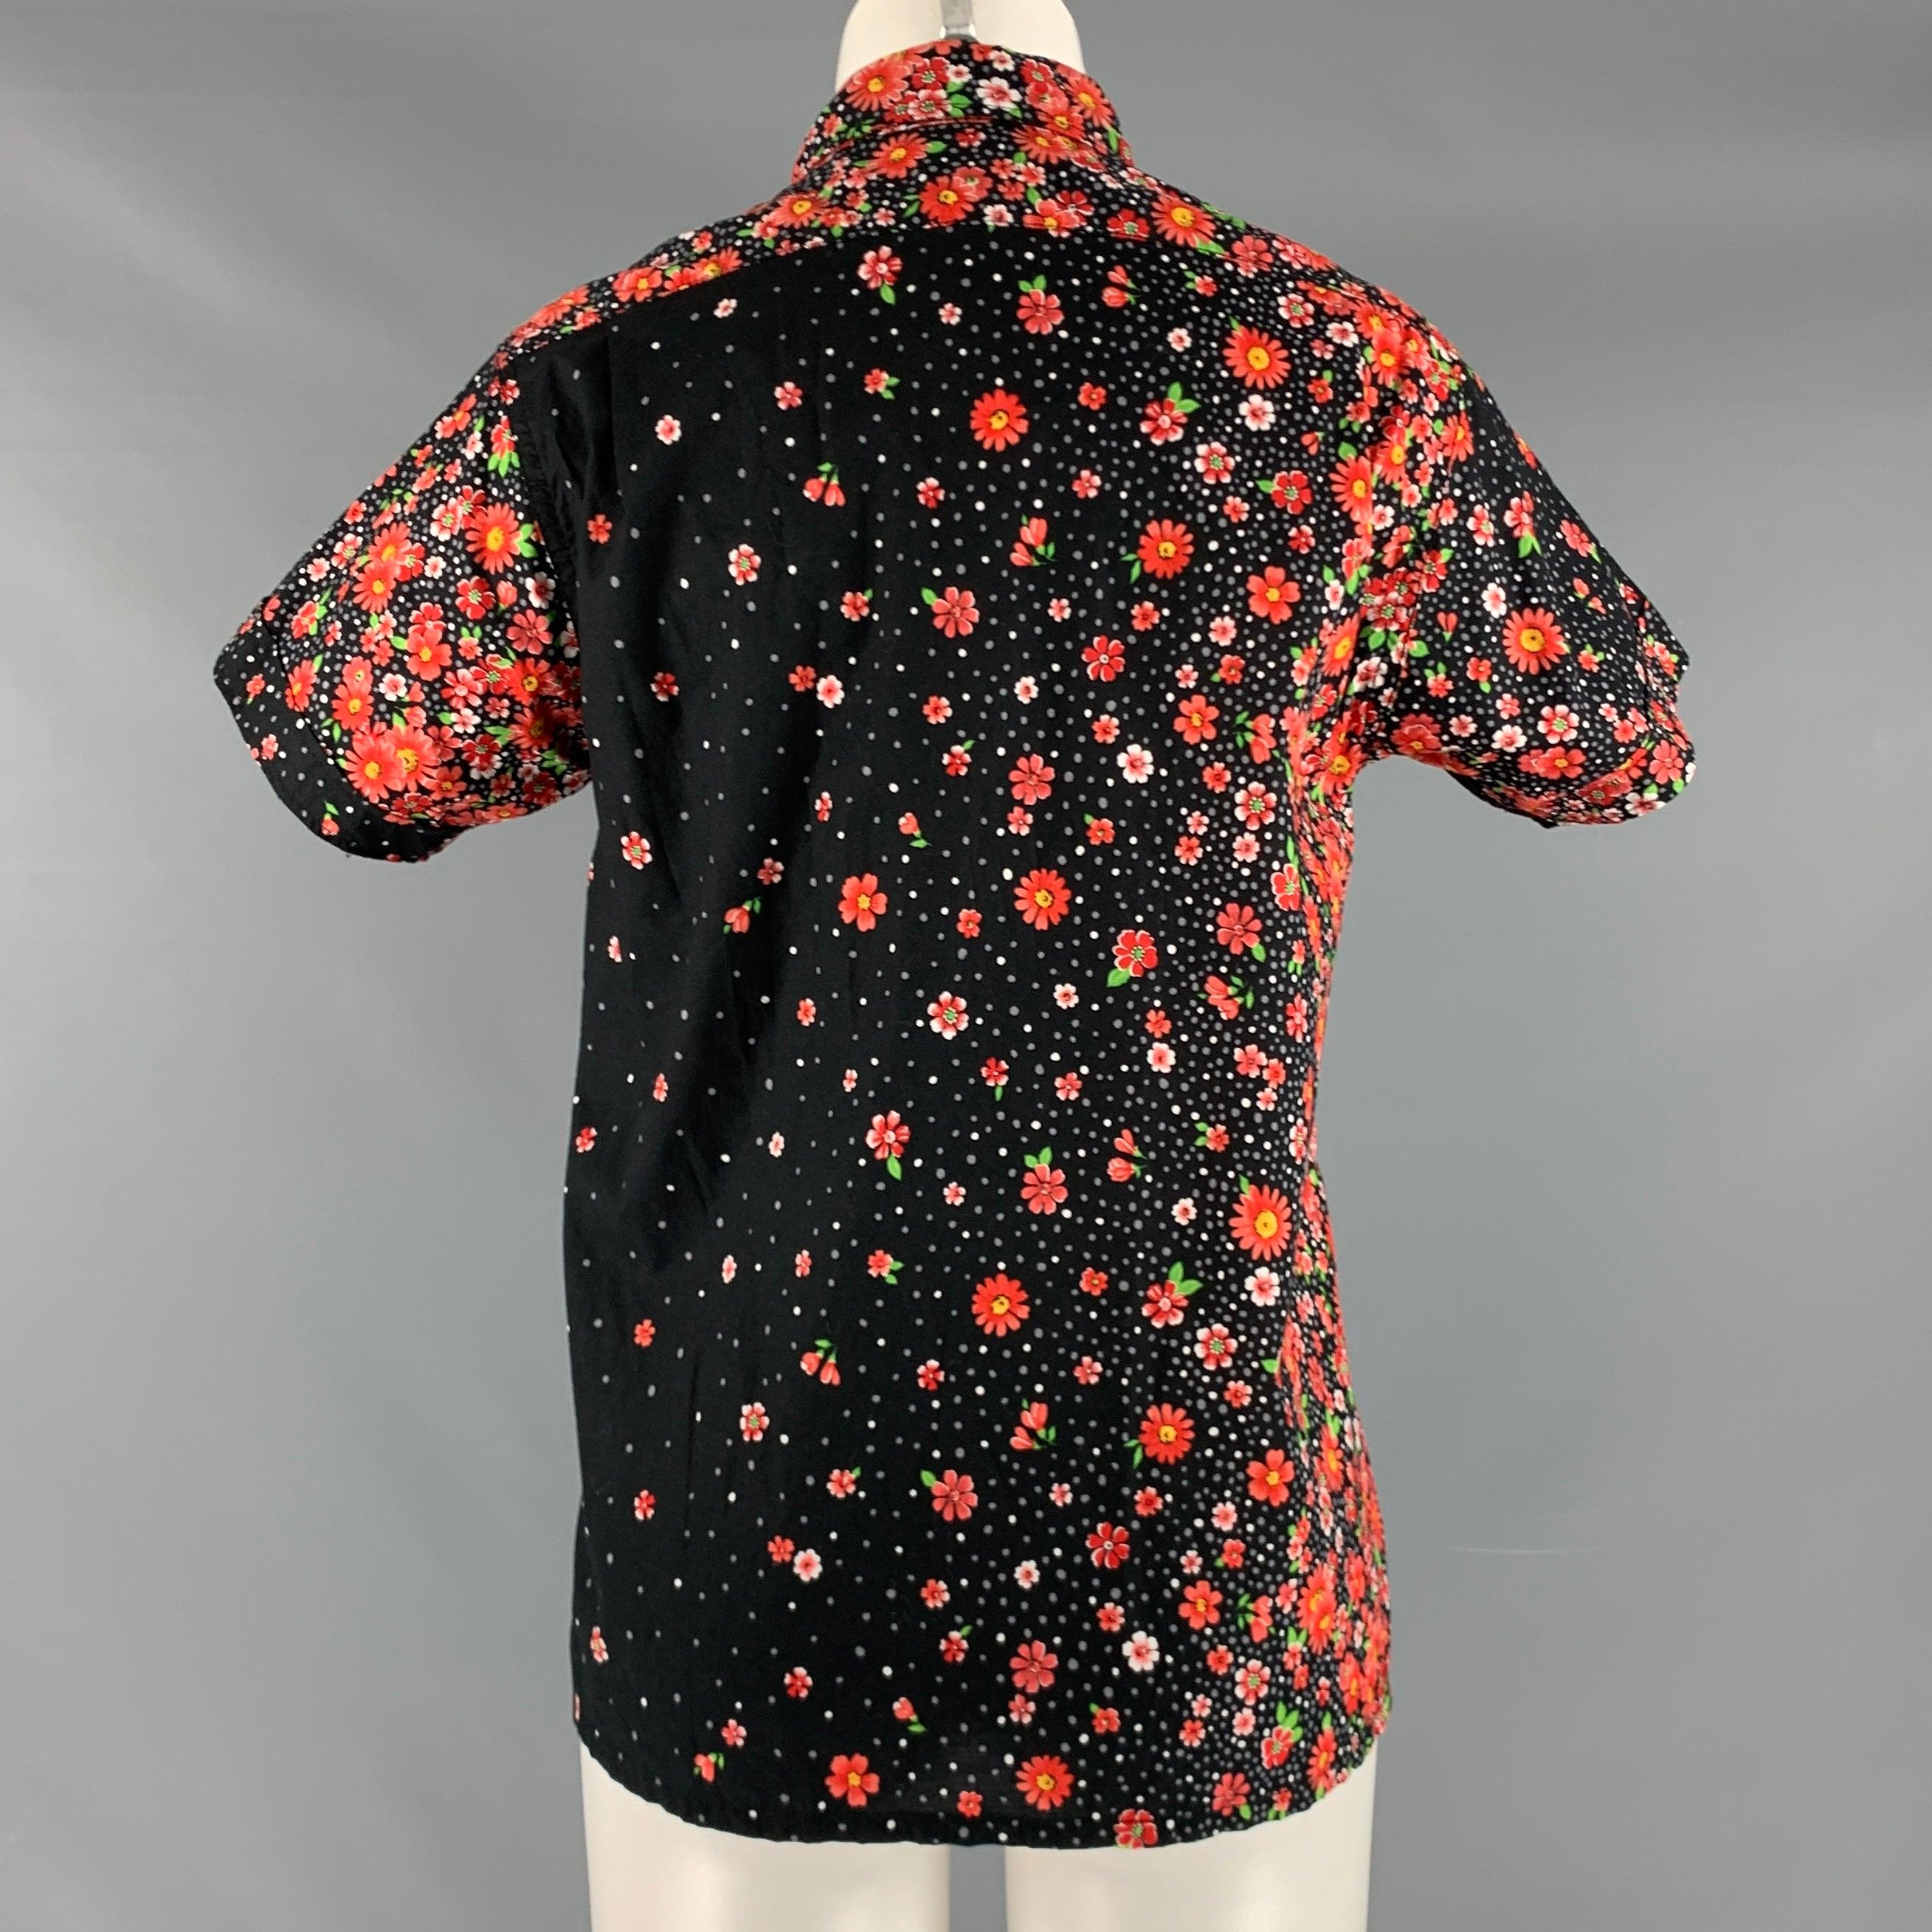 Women's ENGINEERED GARMENTS Size S Black Red Cotton Floral Short Sleeve Casual Top